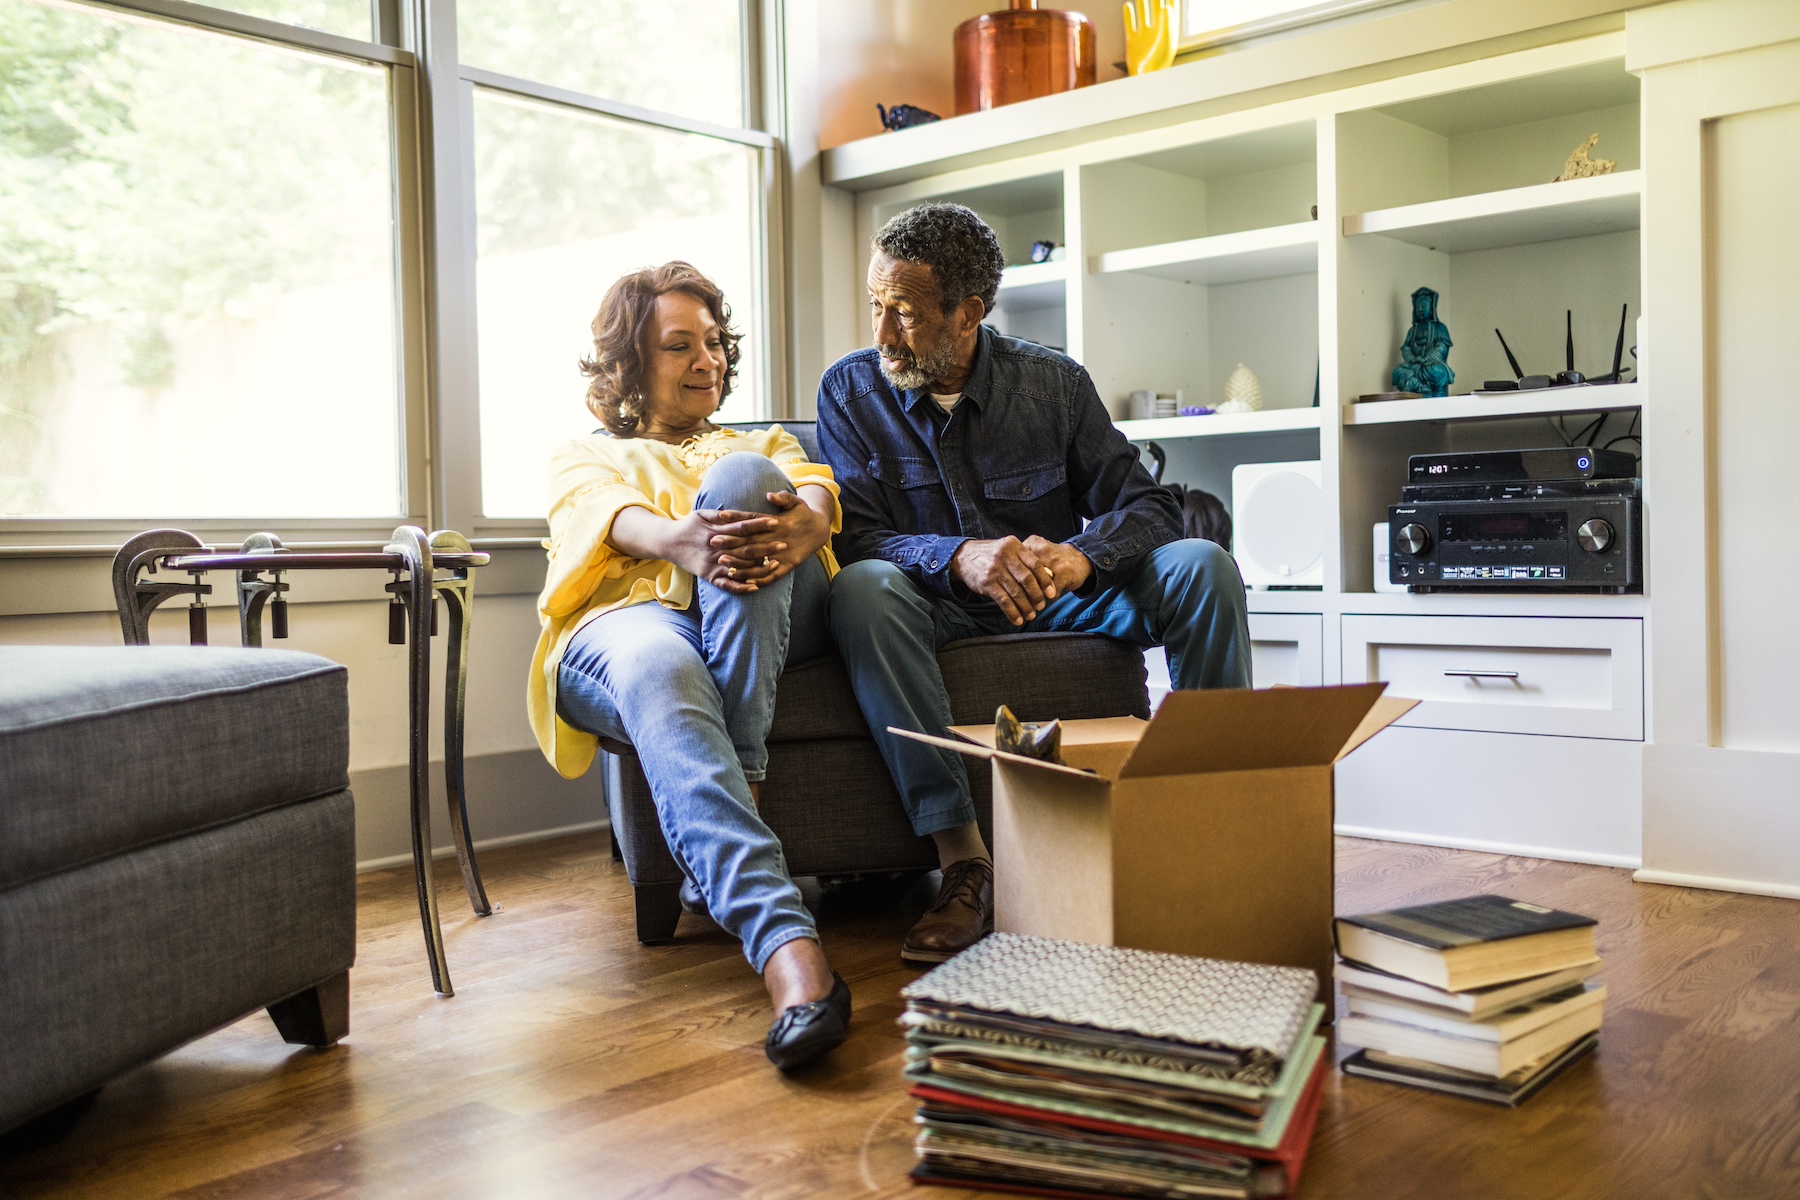 An older couple sits together to take a break from packing moving boxes at home